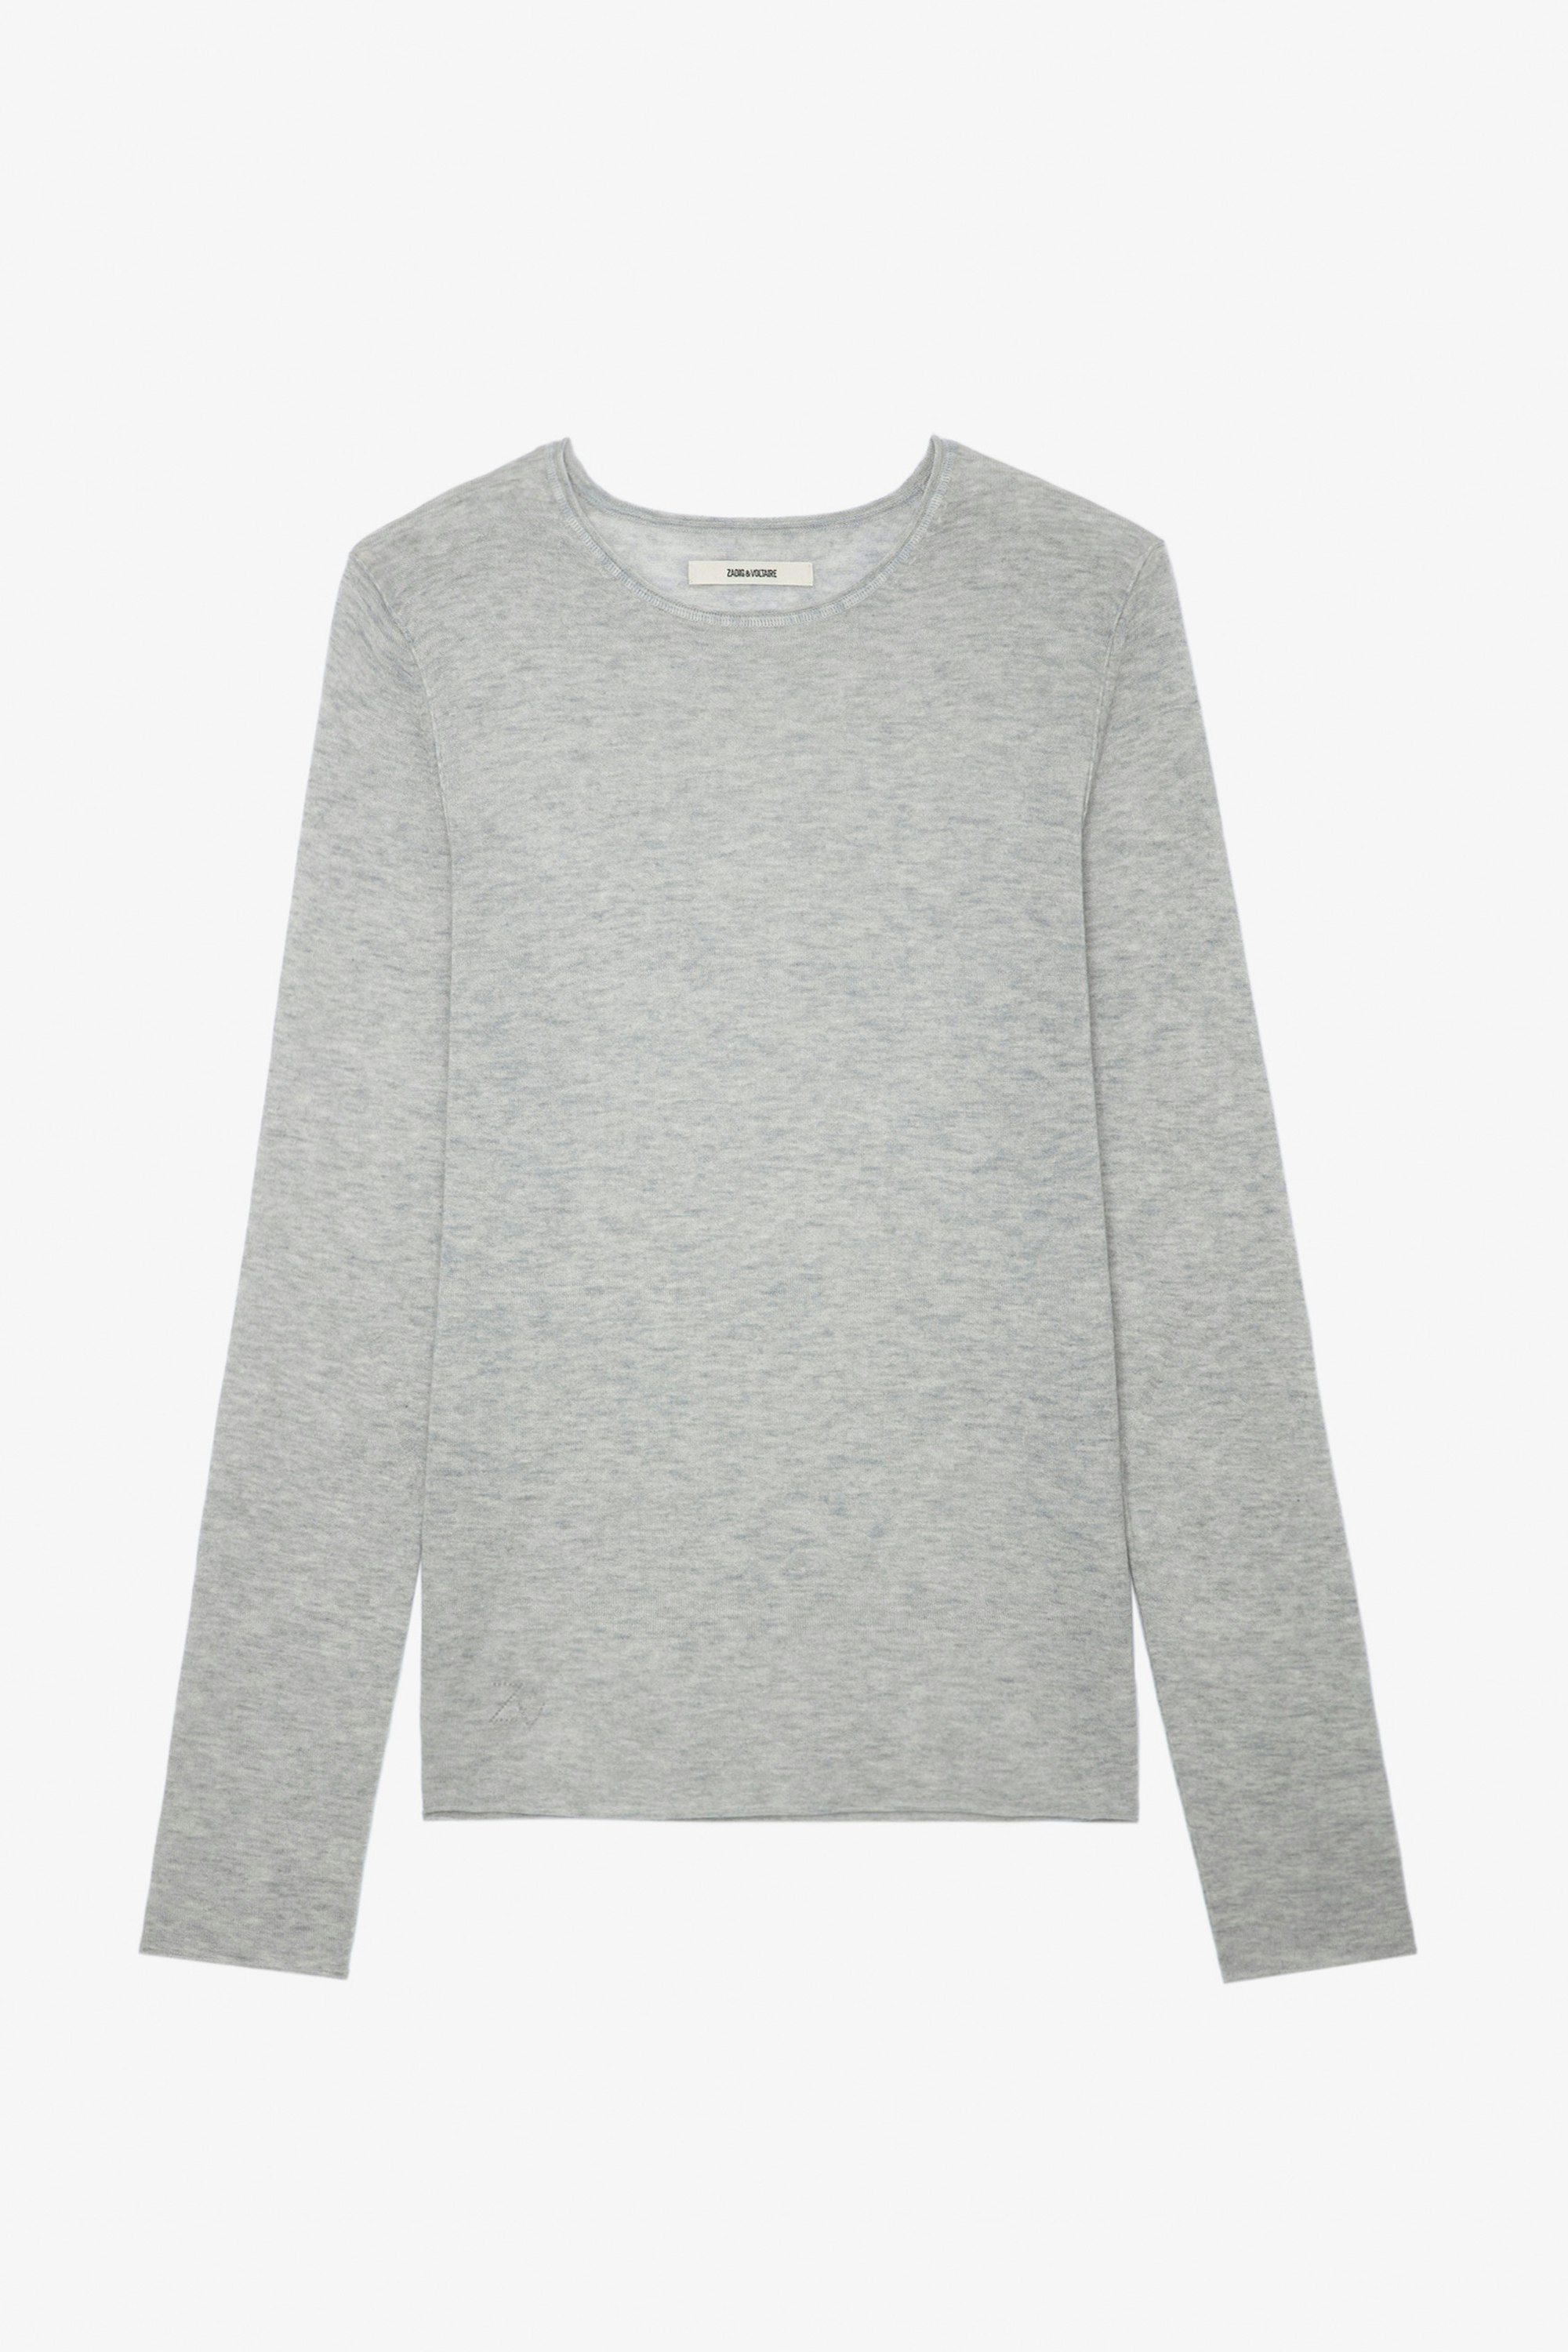 Teiss カシミヤセーター - Men’s grey feather cashmere sweater.